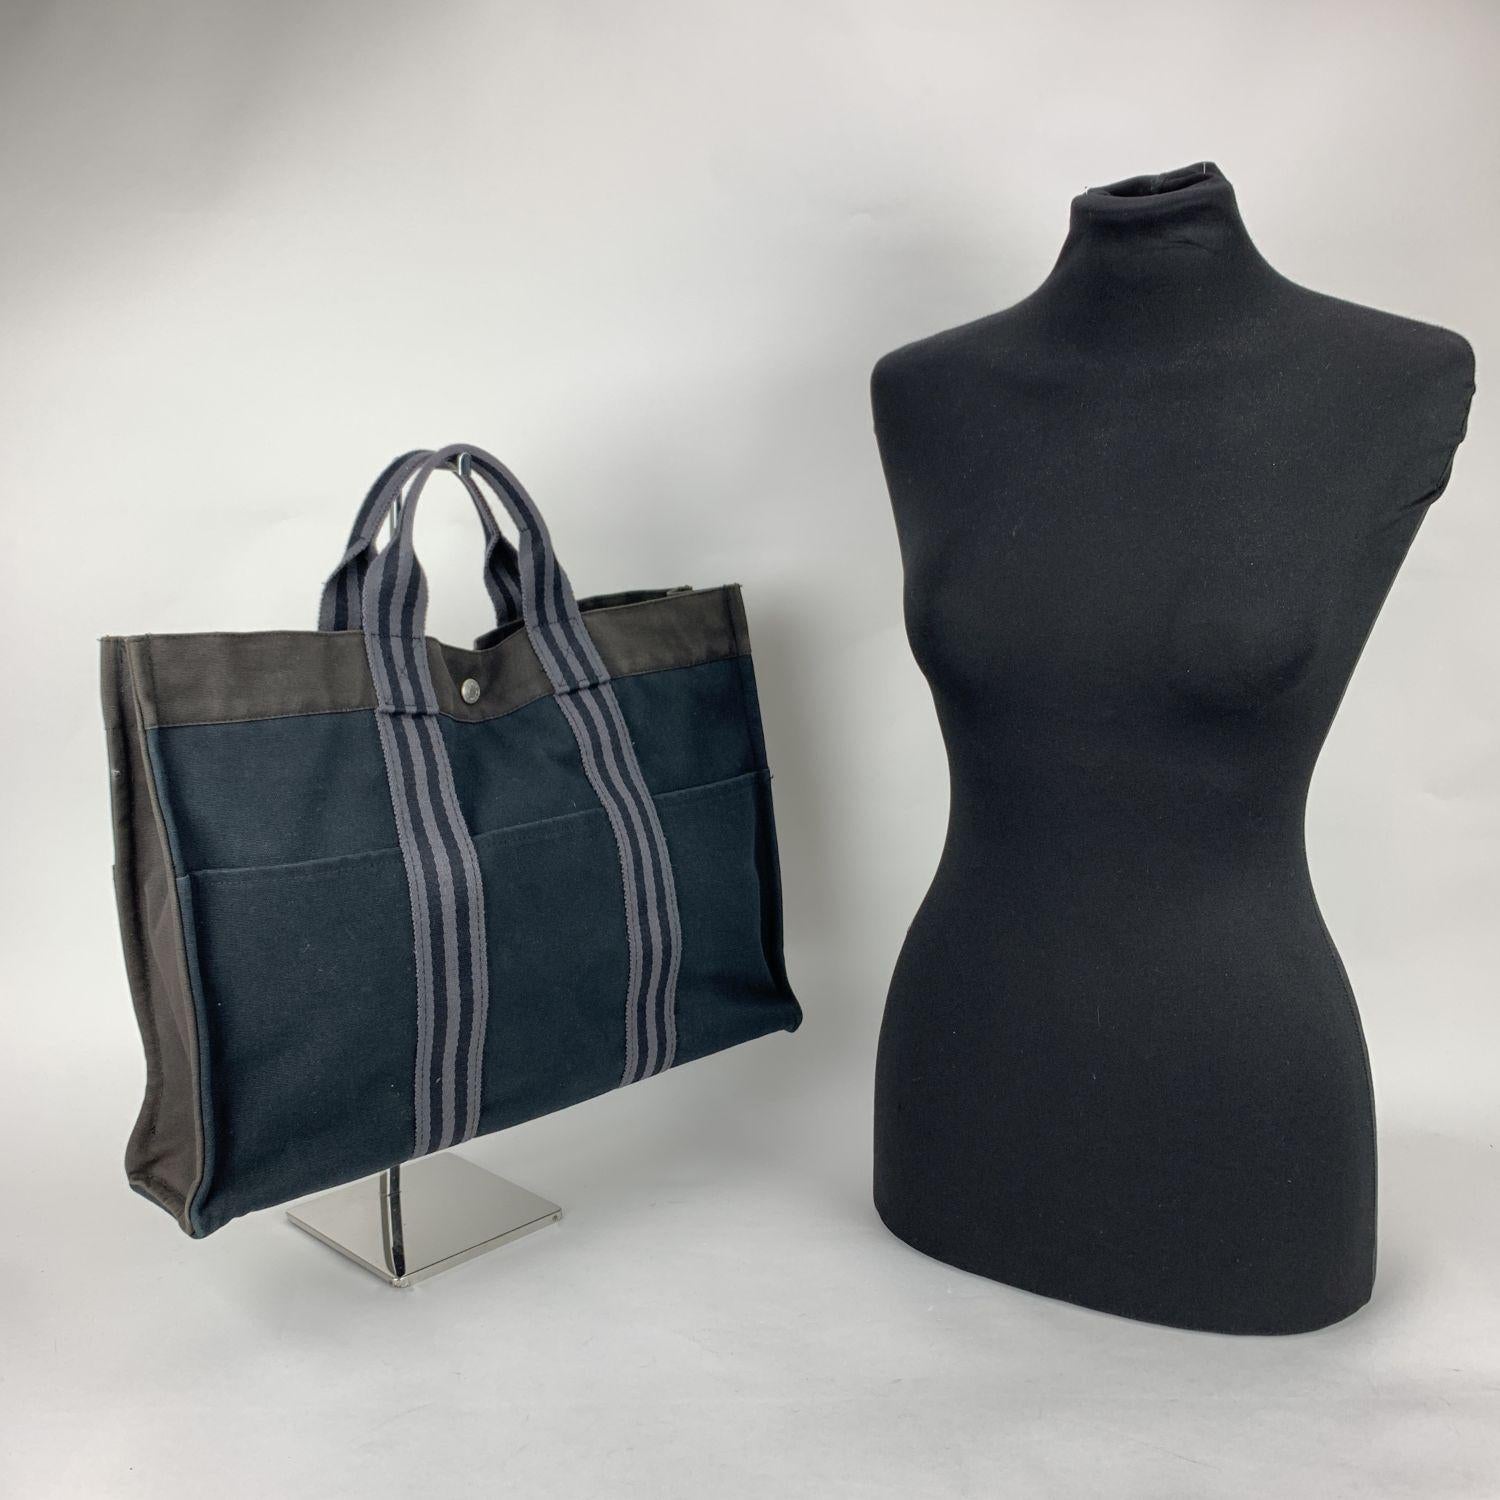 'HERMES FOURRE TOUT - MM' - Tote handbag. Made in France. Black front and back, gray sides and upper part and light grey stripes on the handles. Material: 100% cotton. It has snaps on both ends for expansion. Durable canvas handles, perfect for